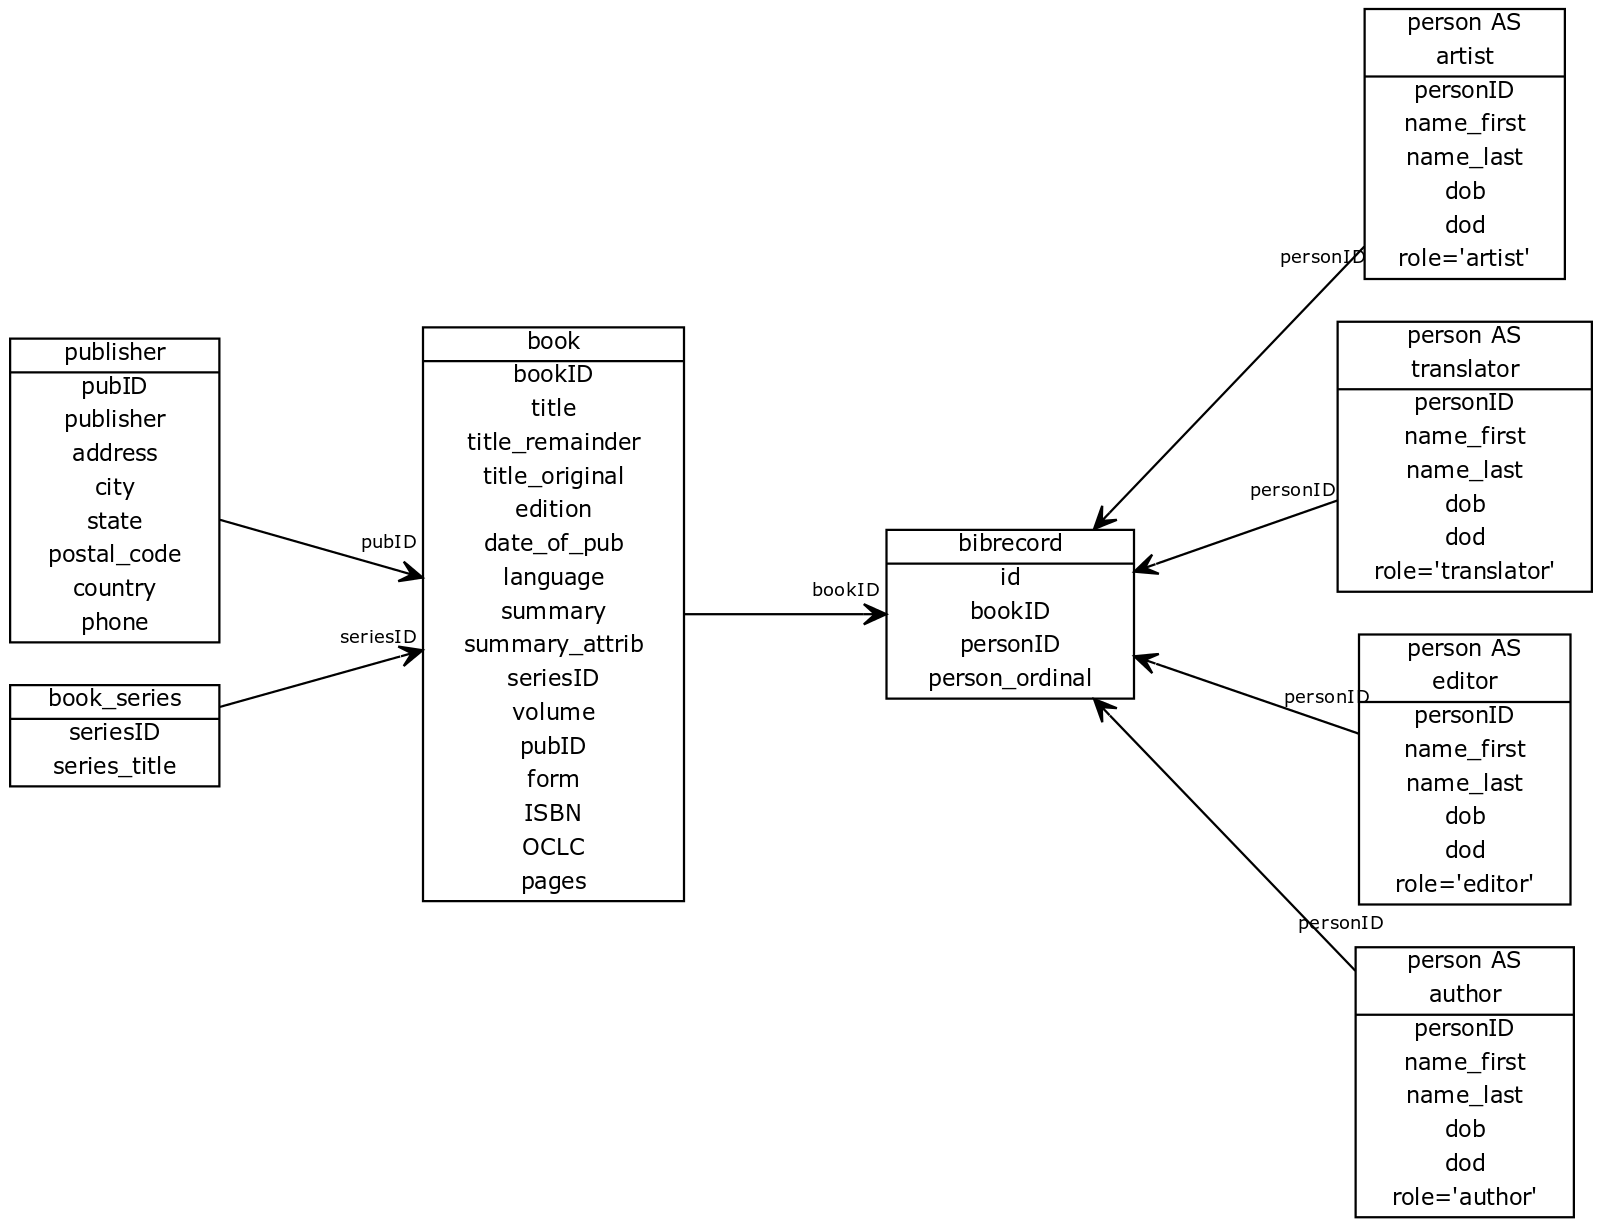 entity relationship diagram of my library's database